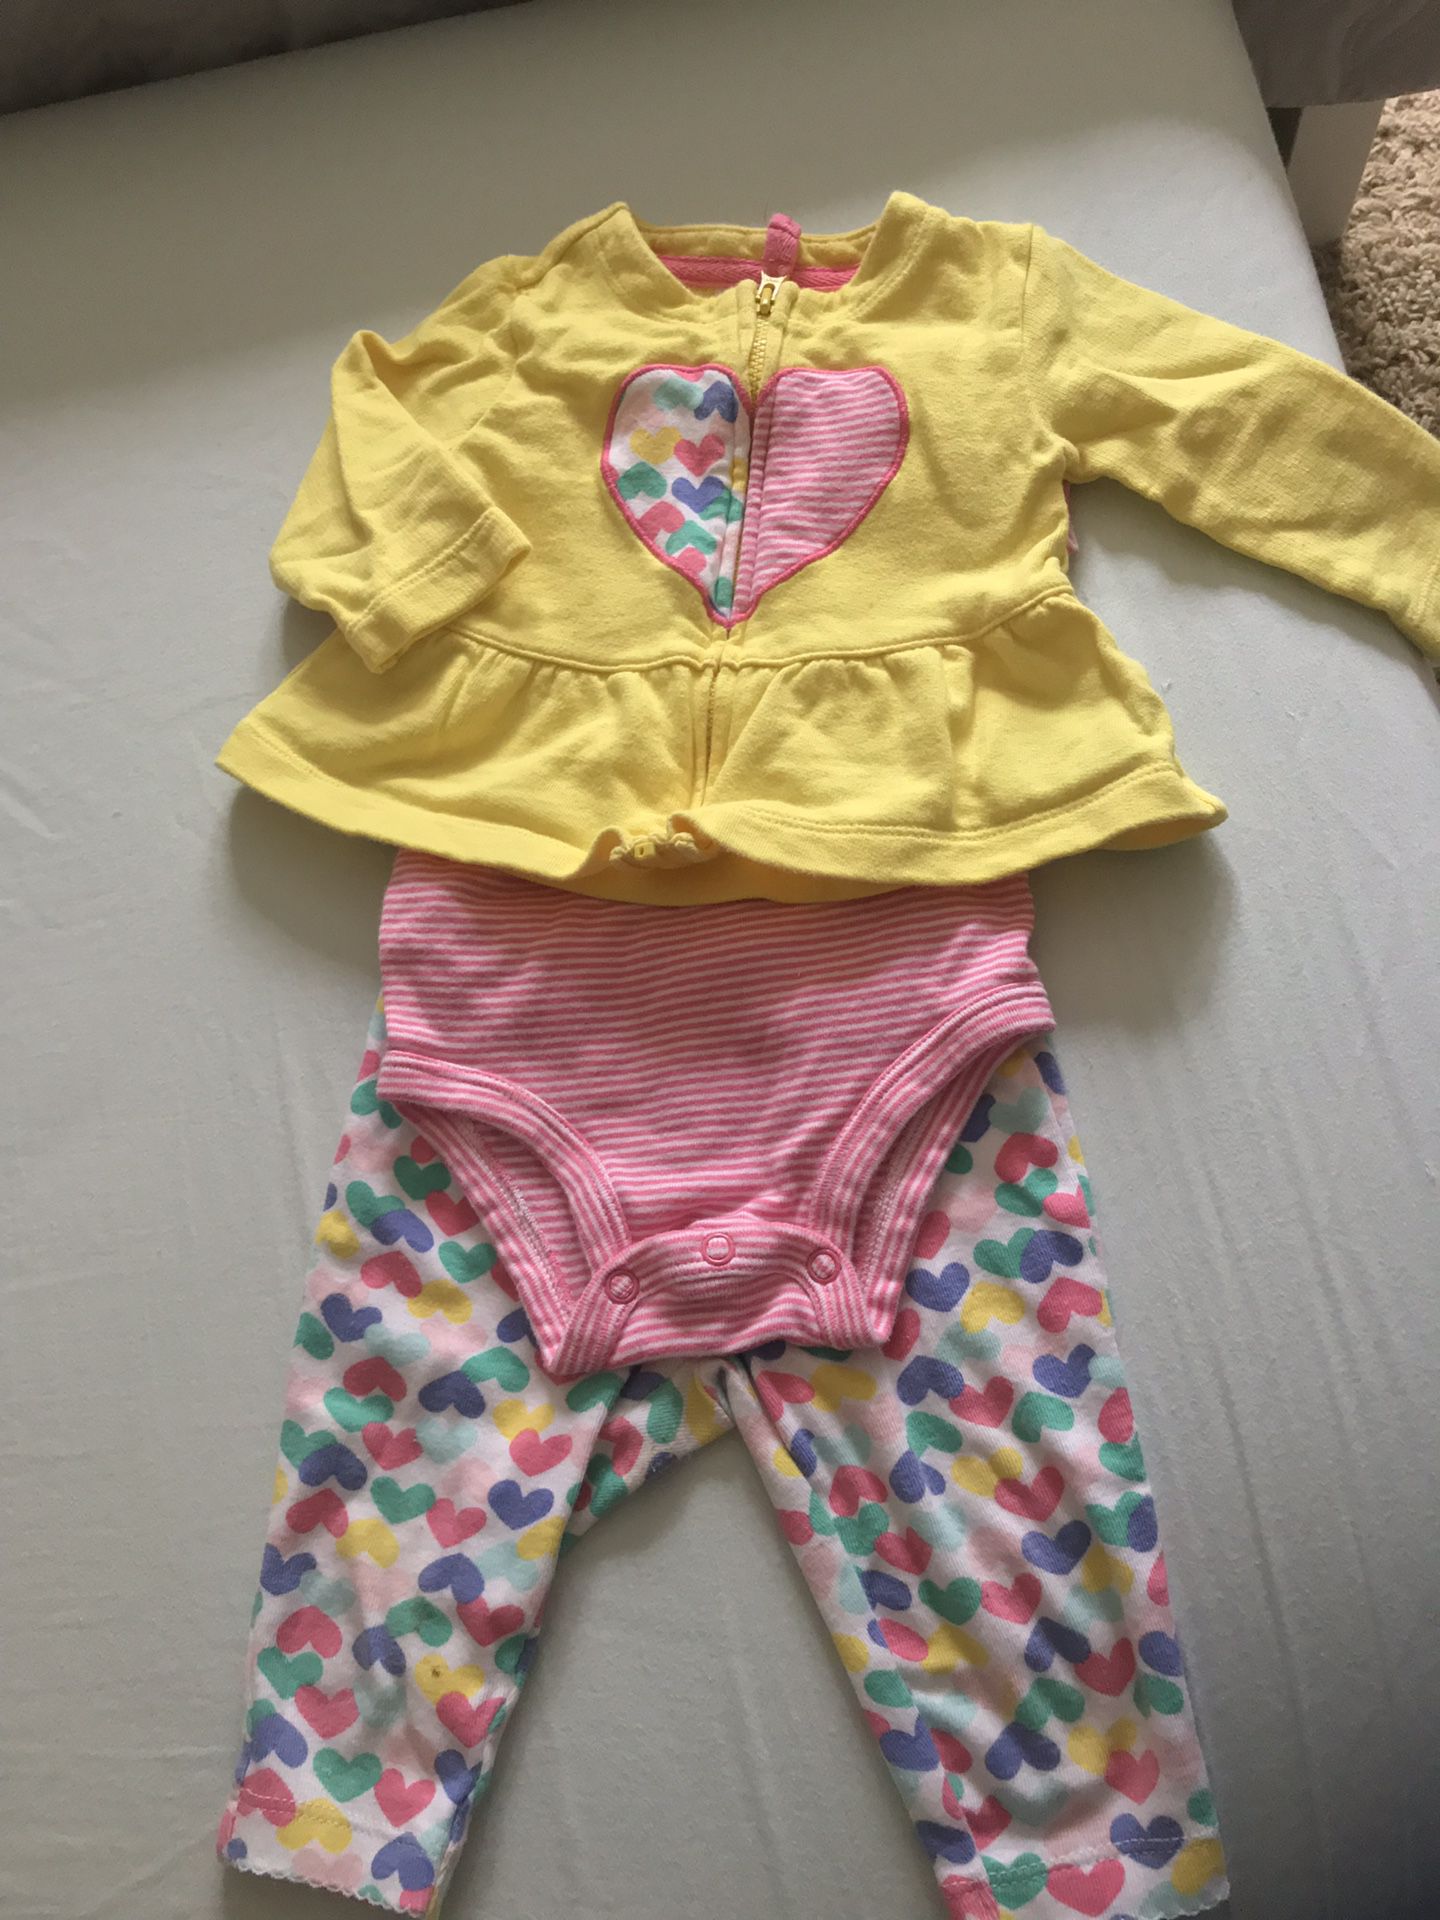 Baby clothes and bag